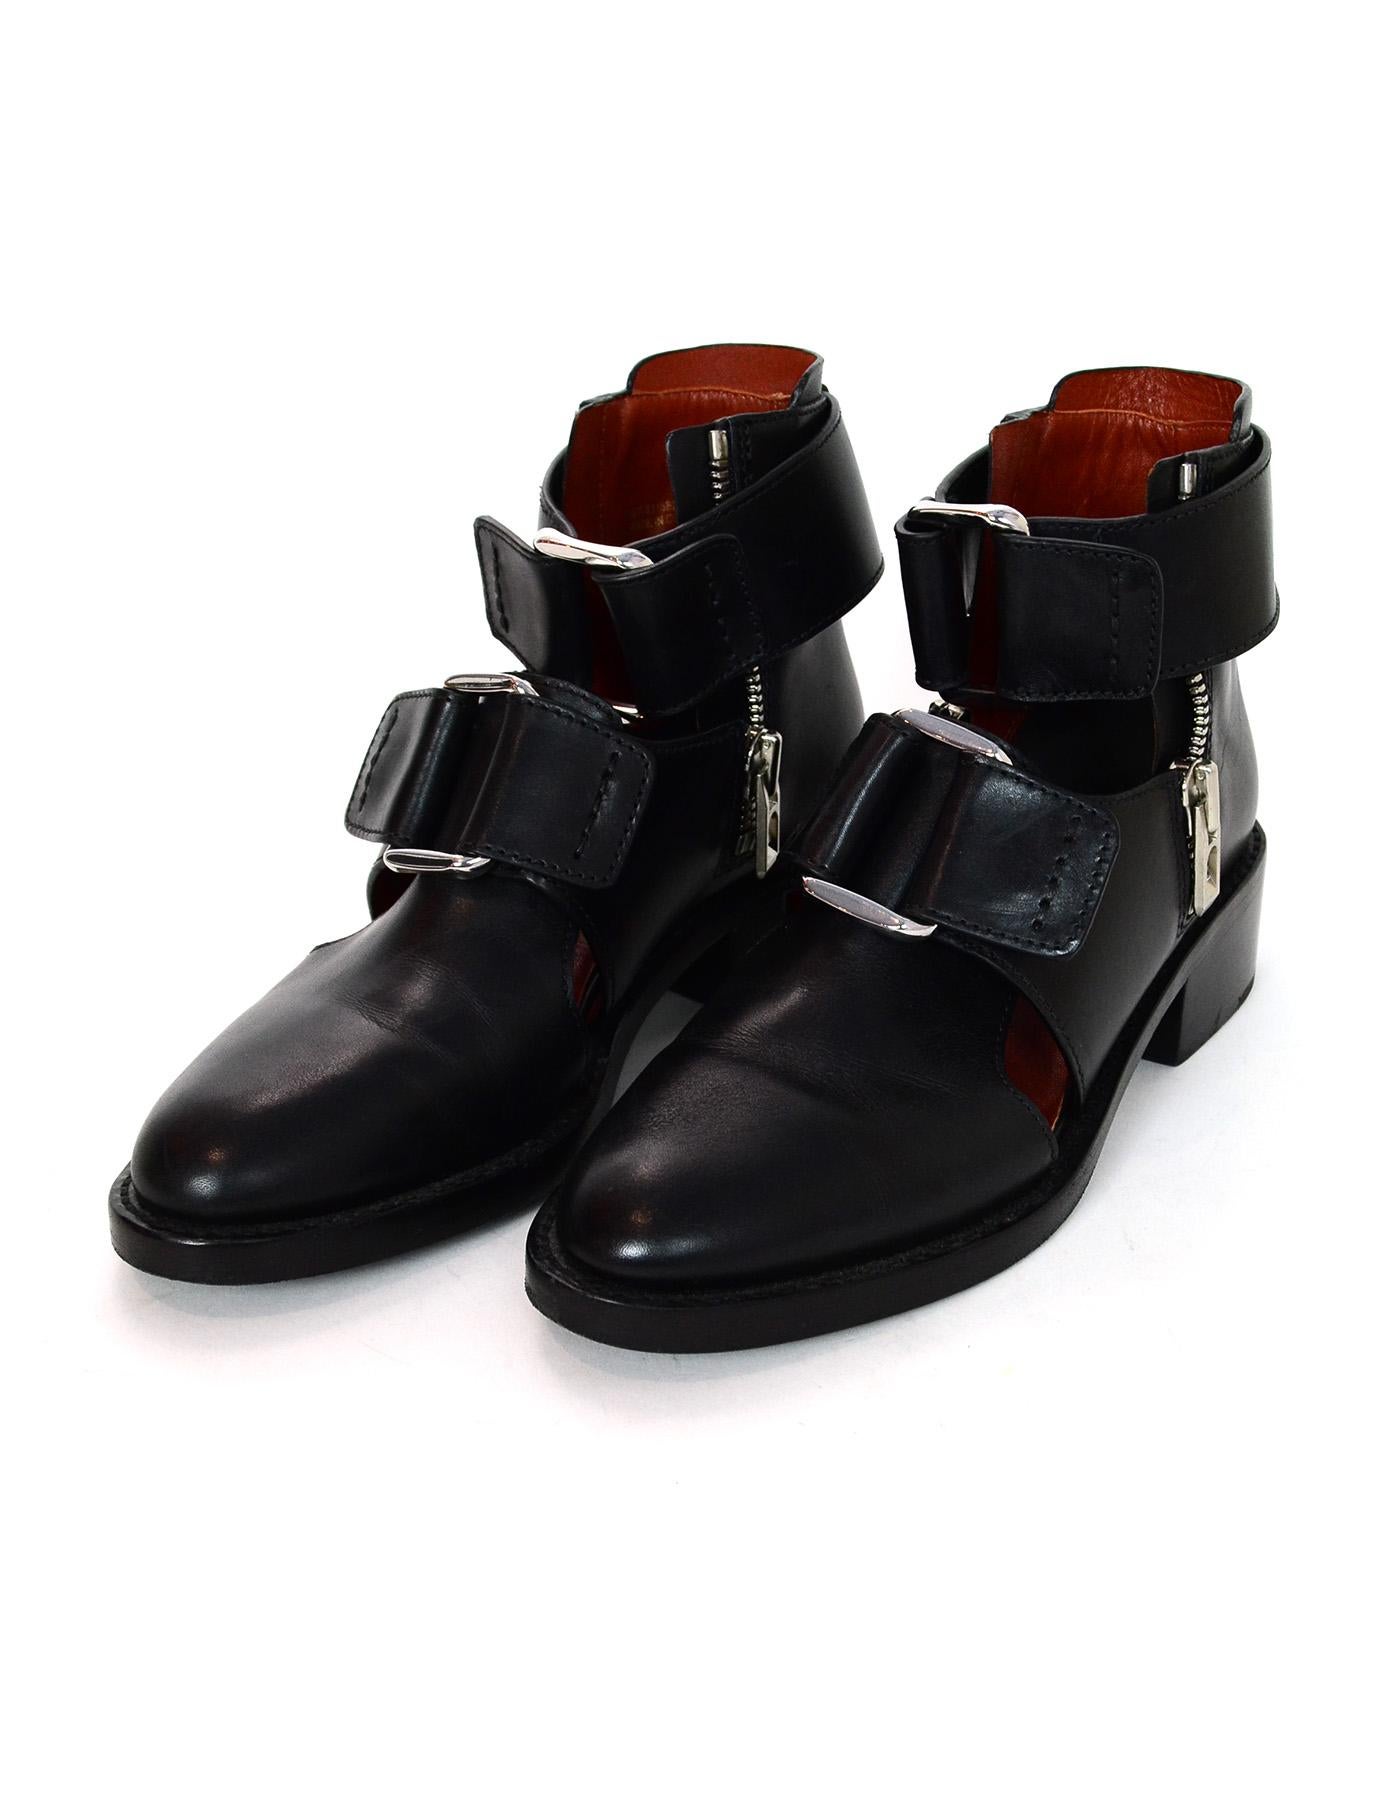 3.1 Phillip Lim Leather Addis Cutout Booties W/ Strap Sz 36

Made In: China
Color: Black and silver
Hardware: Silvertone
Materials: Leather 
Closure/Opening: Slide on with small side zips
Overall Condition: Excellent pre-owned condition with